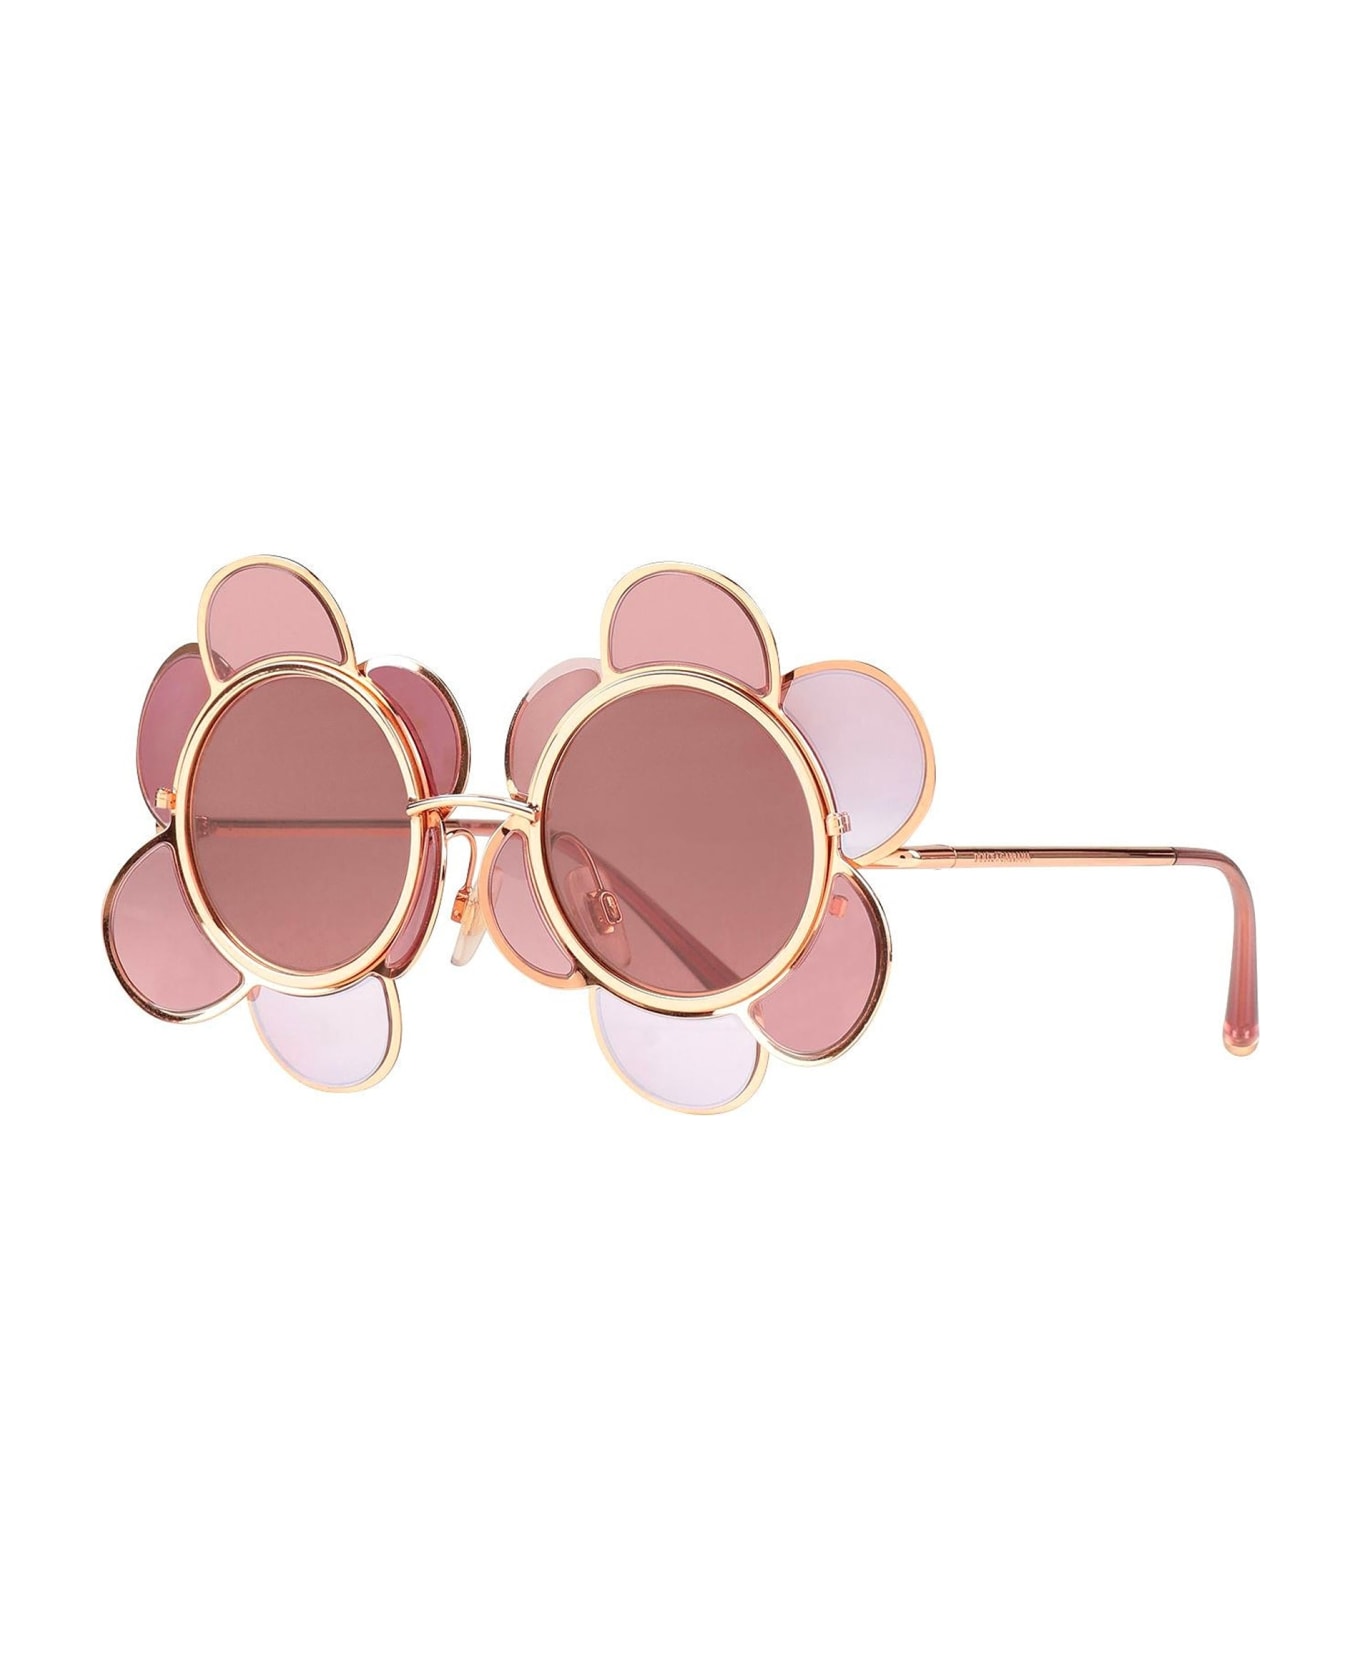 Dolce & Gabbana Special Edition Flower Sunglasses - Pink